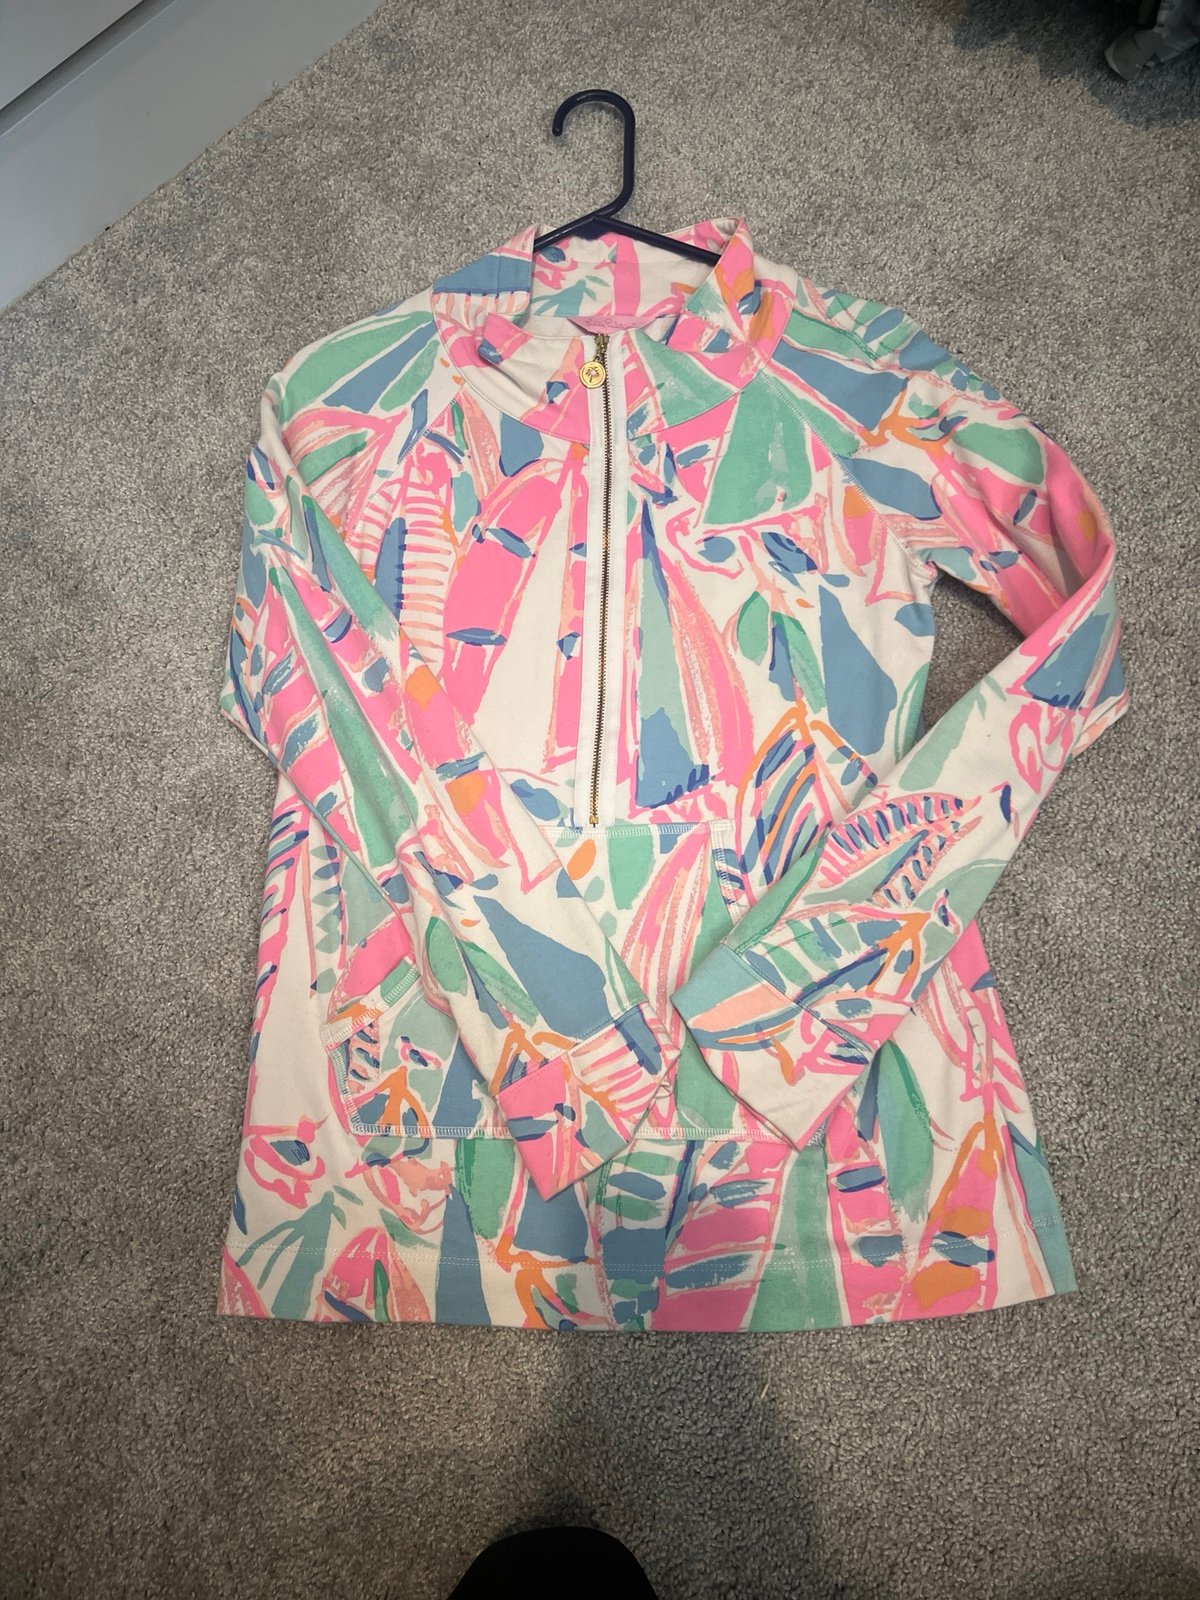 high discount Lilly Pulitzer 1/4 zip up ljCh2JBiP all for you